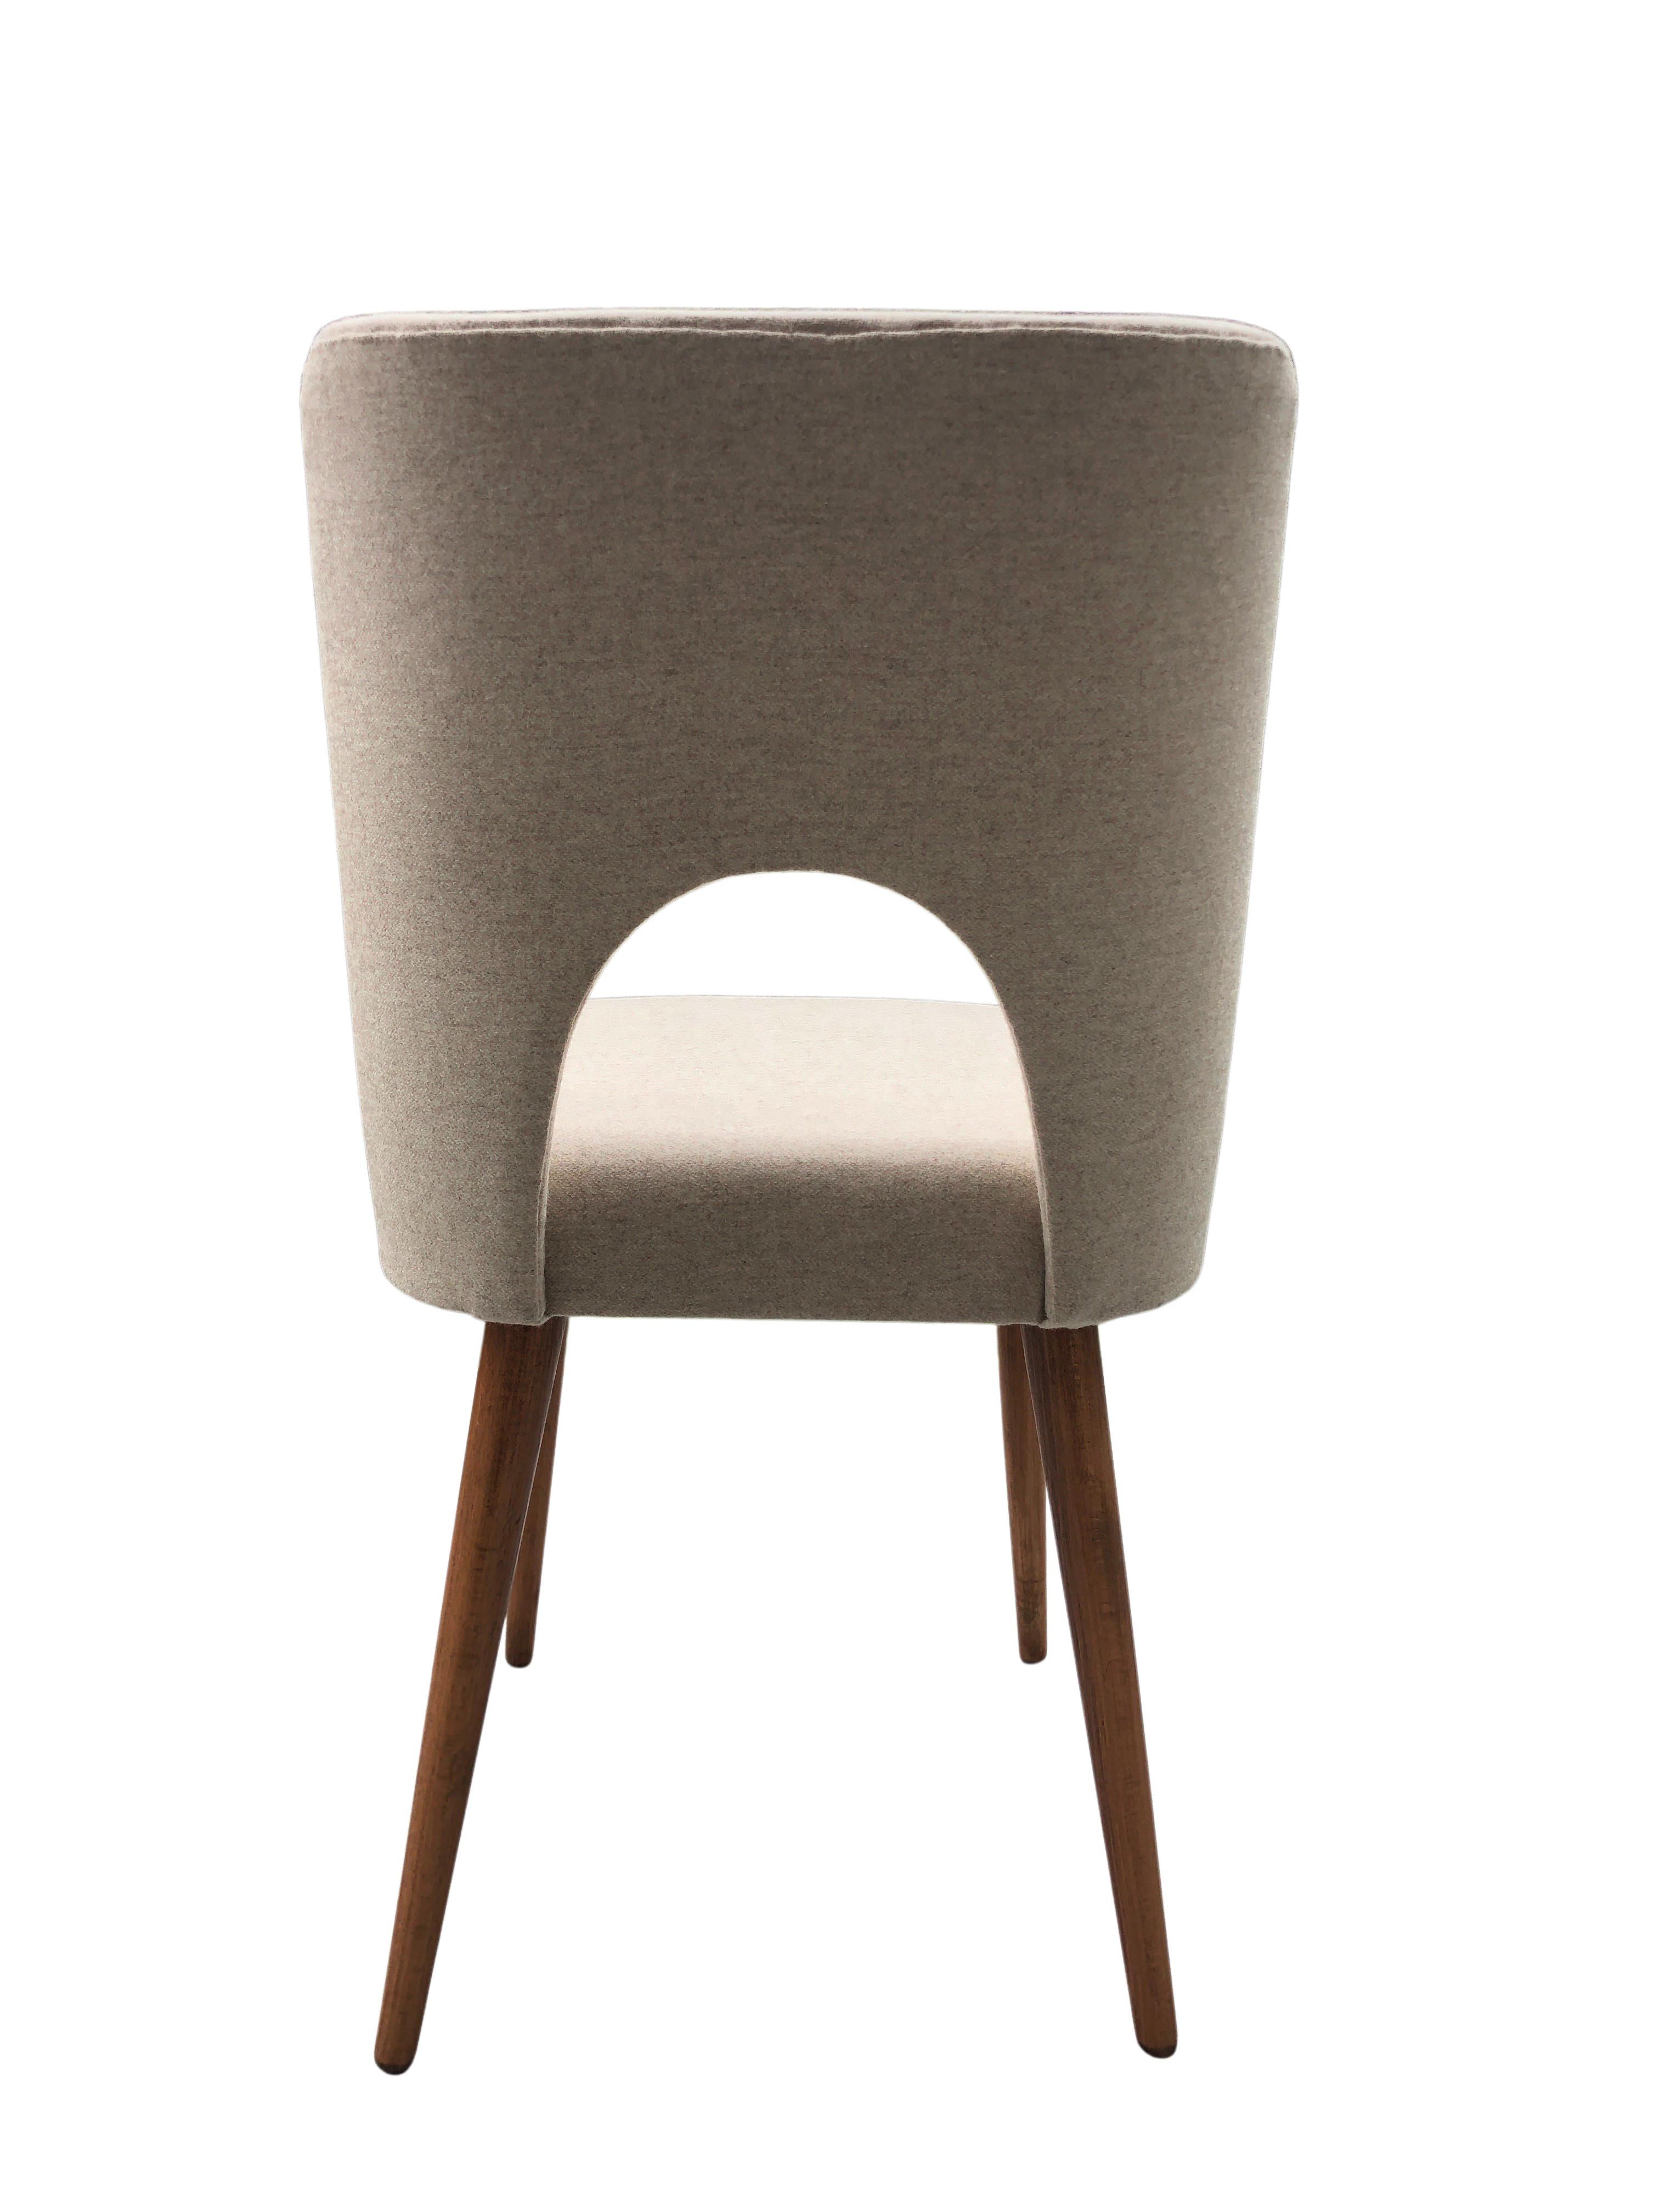 Beige Wool Shell Dining Chair by Lesniewski, 1960s For Sale 2